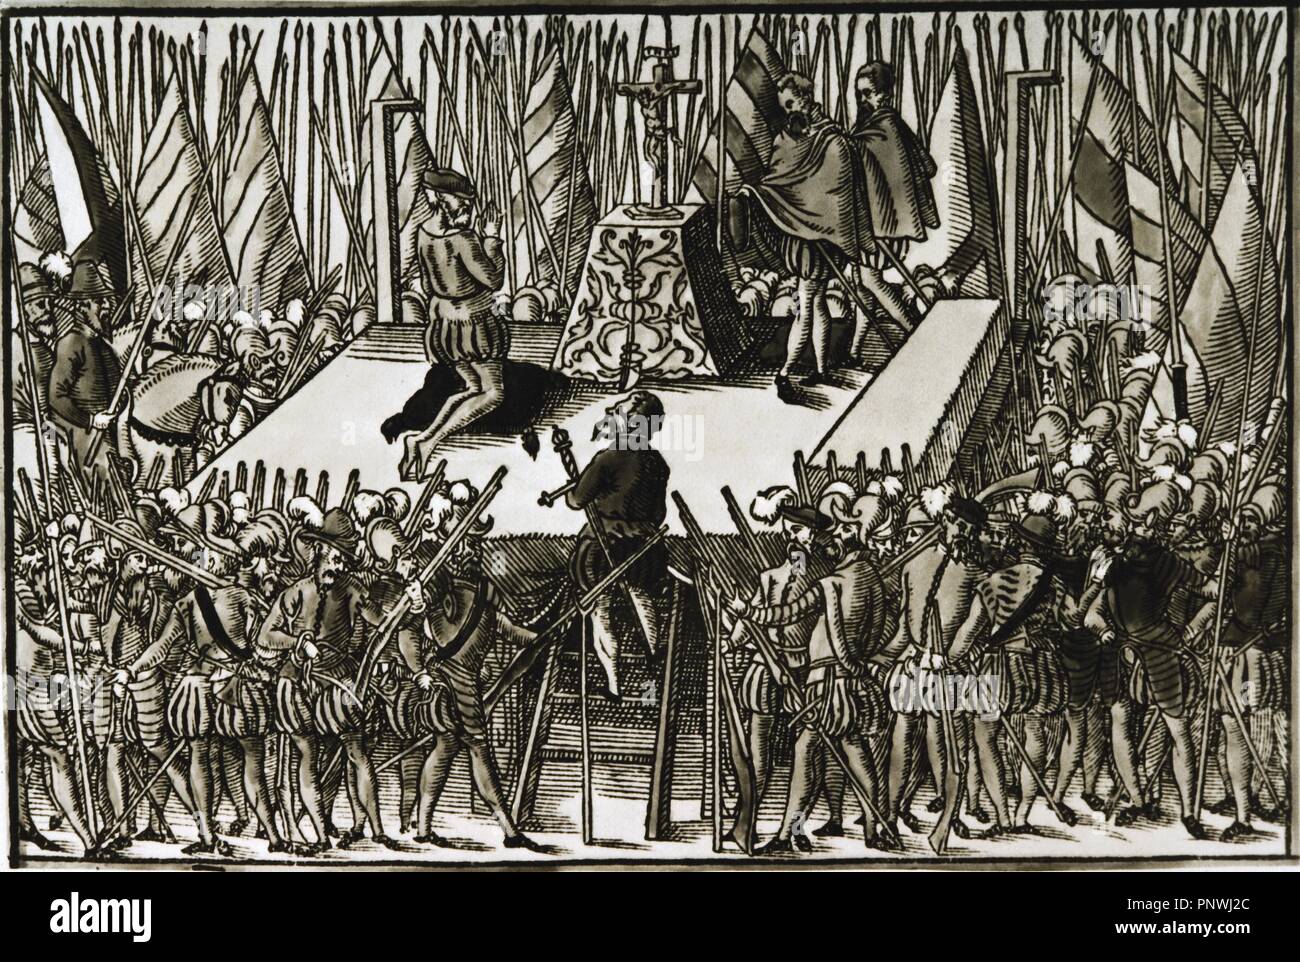 Eighty Year's War or Dutch of Independence 1568-1648. Execution of the Counts of Egmond and Hoorn, Brussels, 1568. Netherlands. Engraving. Stock Photo